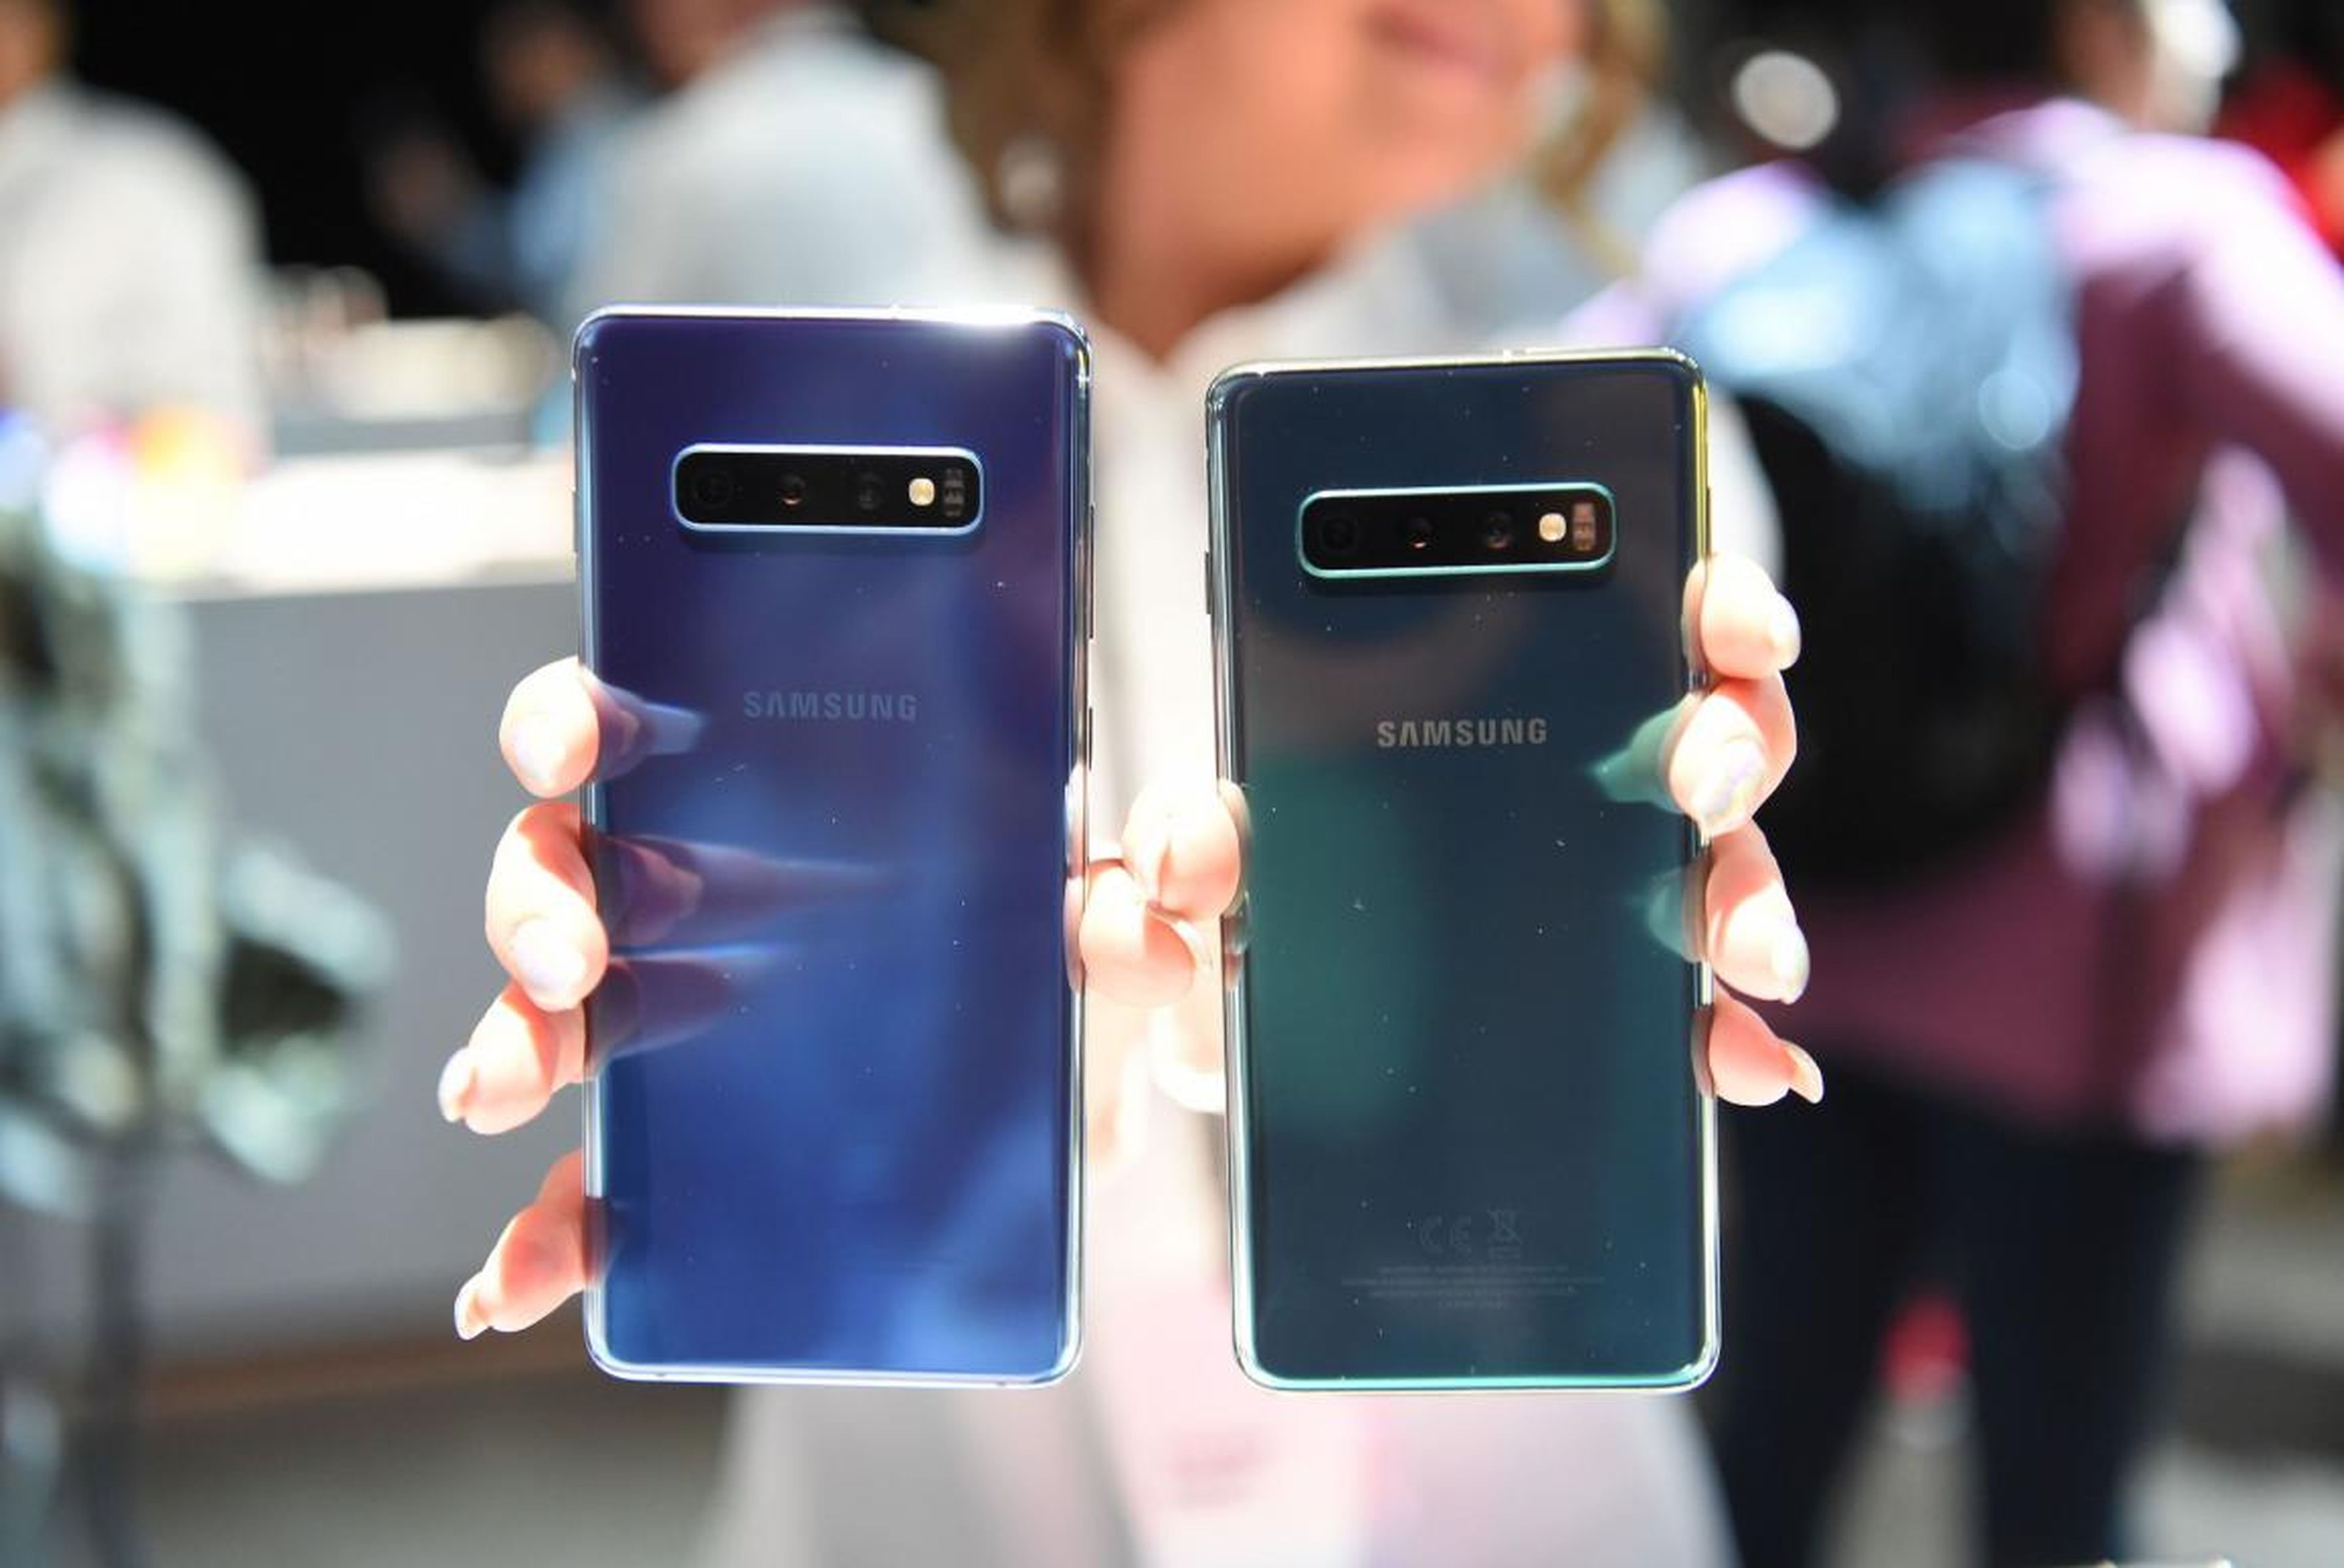 Back in March, my colleague Tony Villas-Boas reviewed Samsung's Galaxy S10. He said its "ultrawide" camera lens was the one feature that helped it stand out among the dozens of other Android smartphones out there.